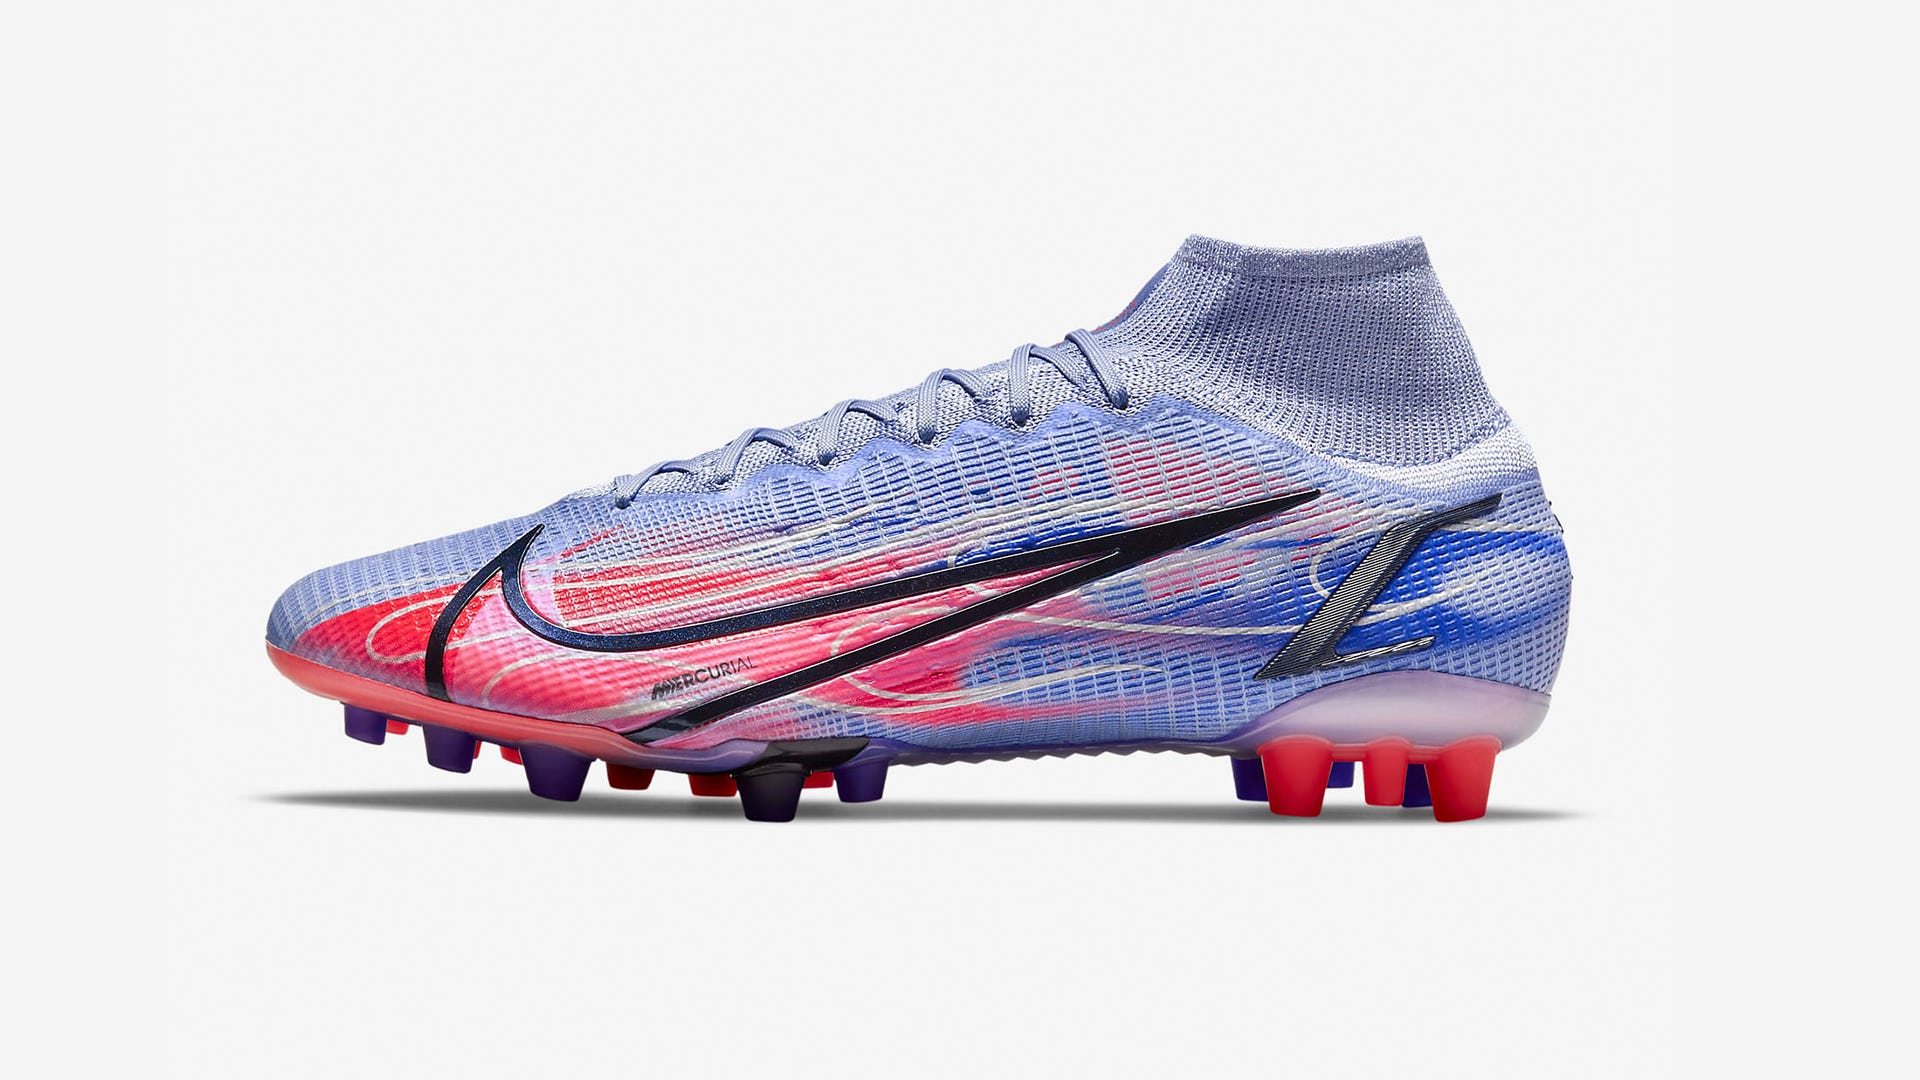 The best artificial ground football boots you can buy in 2022 | Goal.com UK